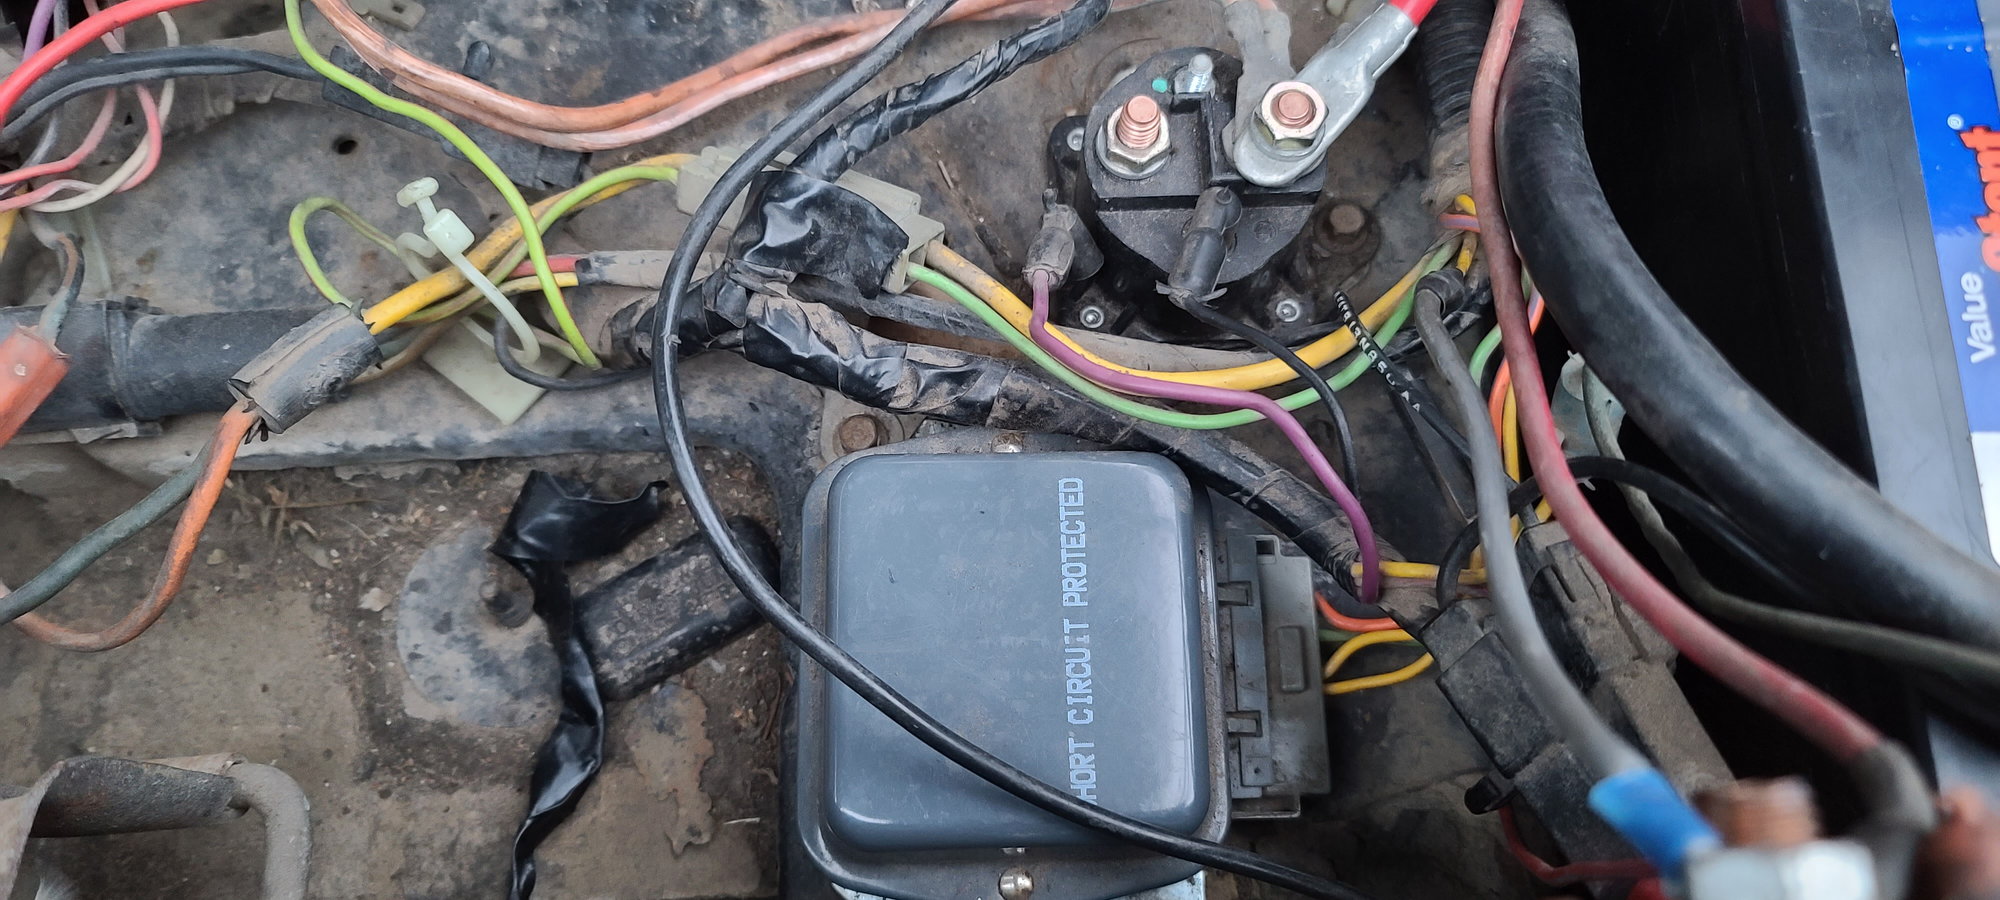 which connector do i unhook first on a car battery